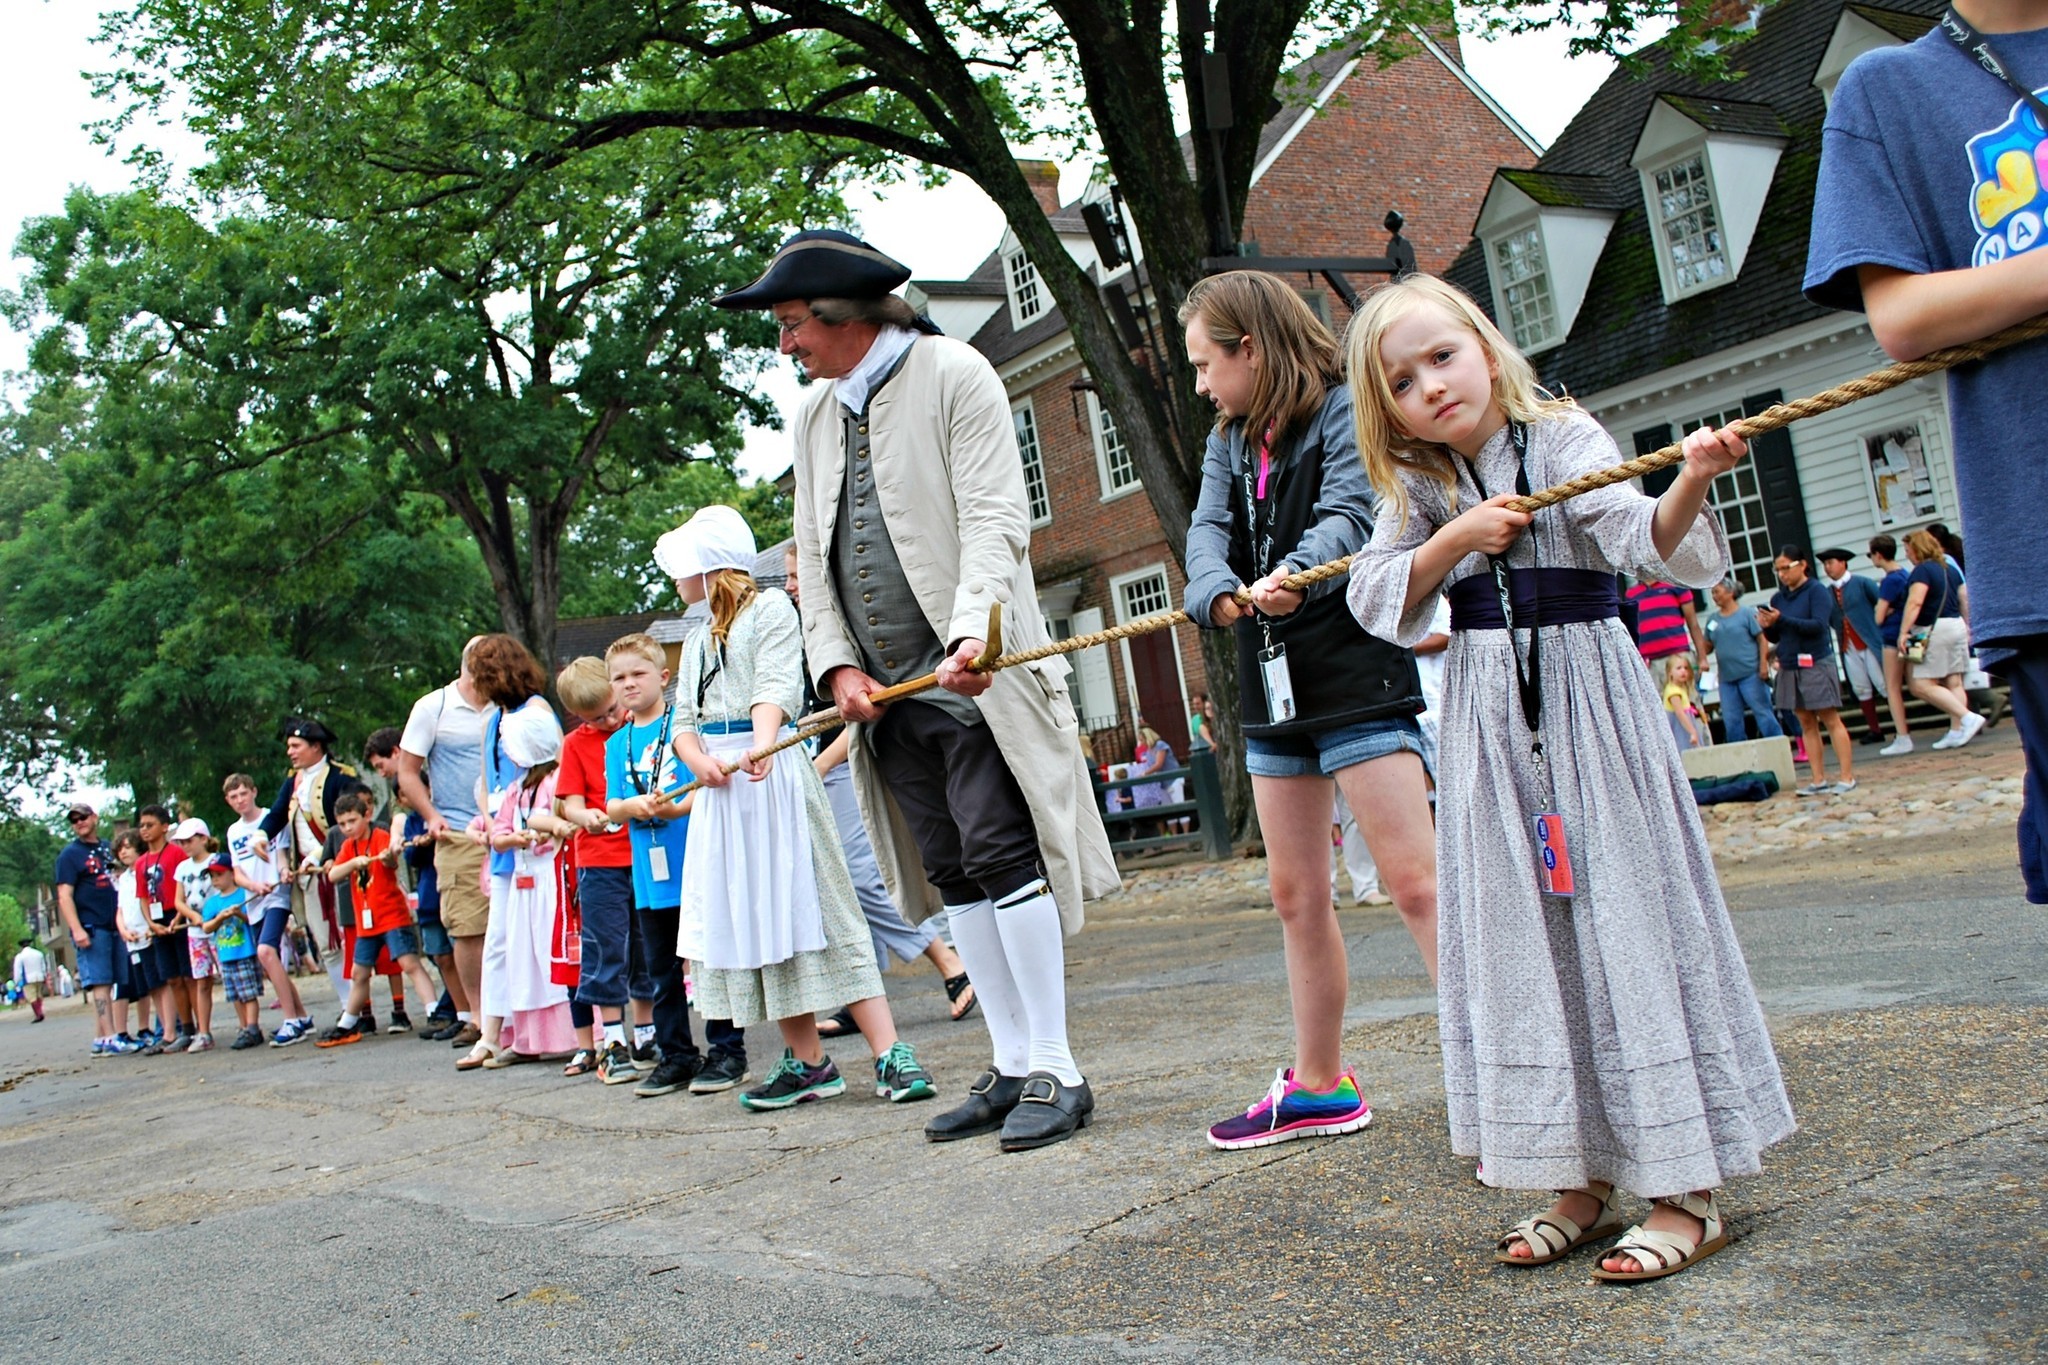 PICTURES: Fourth of July at Colonial Williamsburg - The Virginia Gazette2048 x 1365